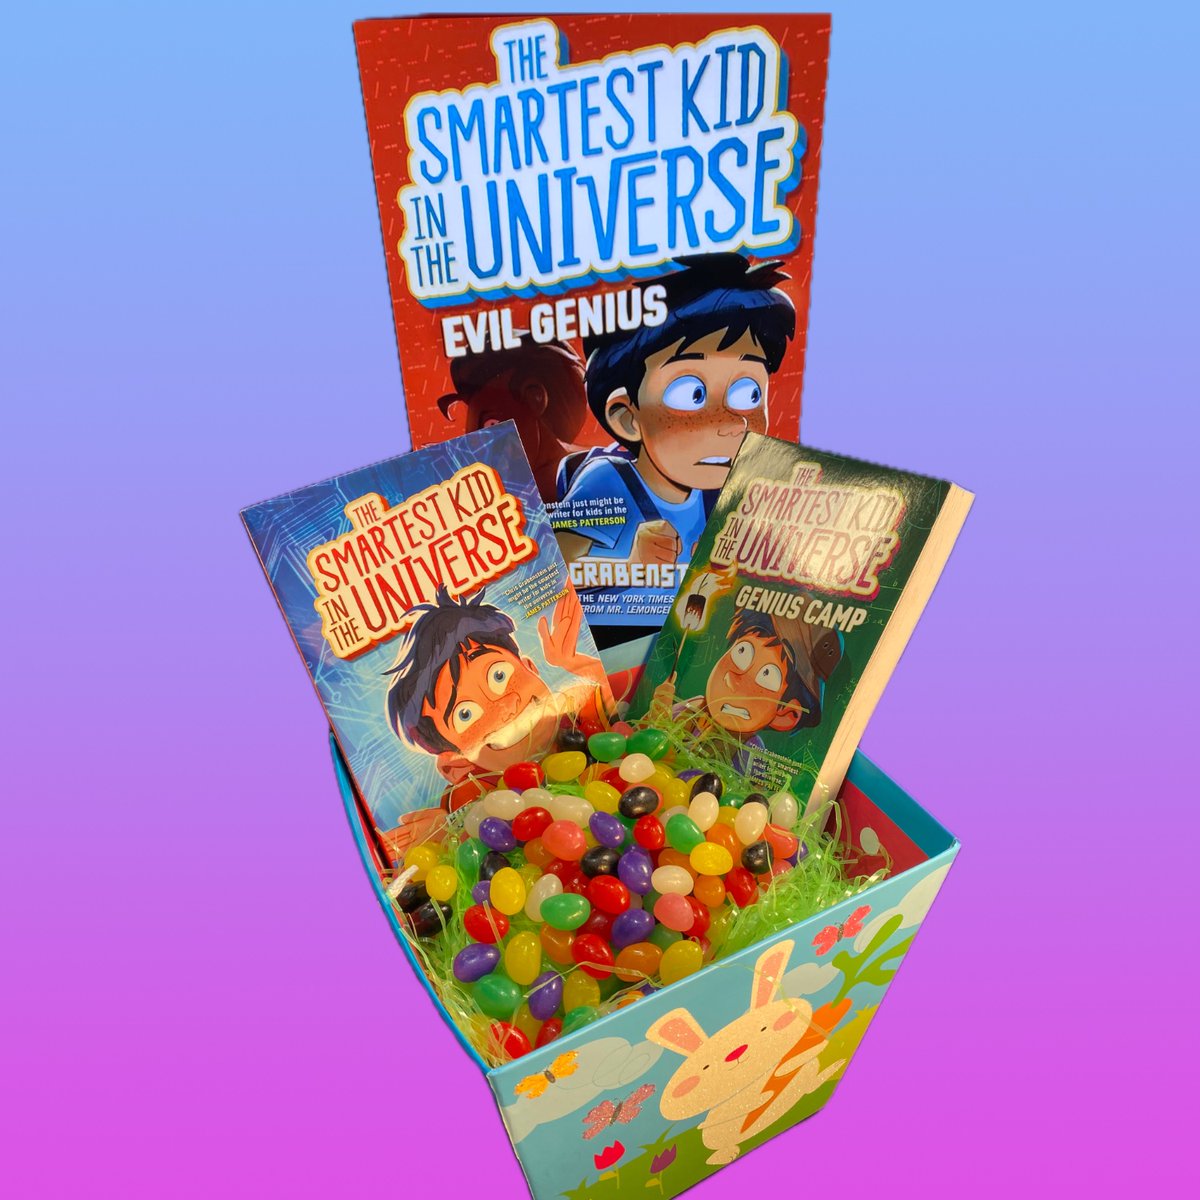 Looking for a book (or three) to tuck into someone's Easter basket? Choose the series with all sorts of jelly beans in it. (Or brightly colored, fruit-flavored, ooey-gooey, Ingestible Knowledge capsules.) @randomhousekids